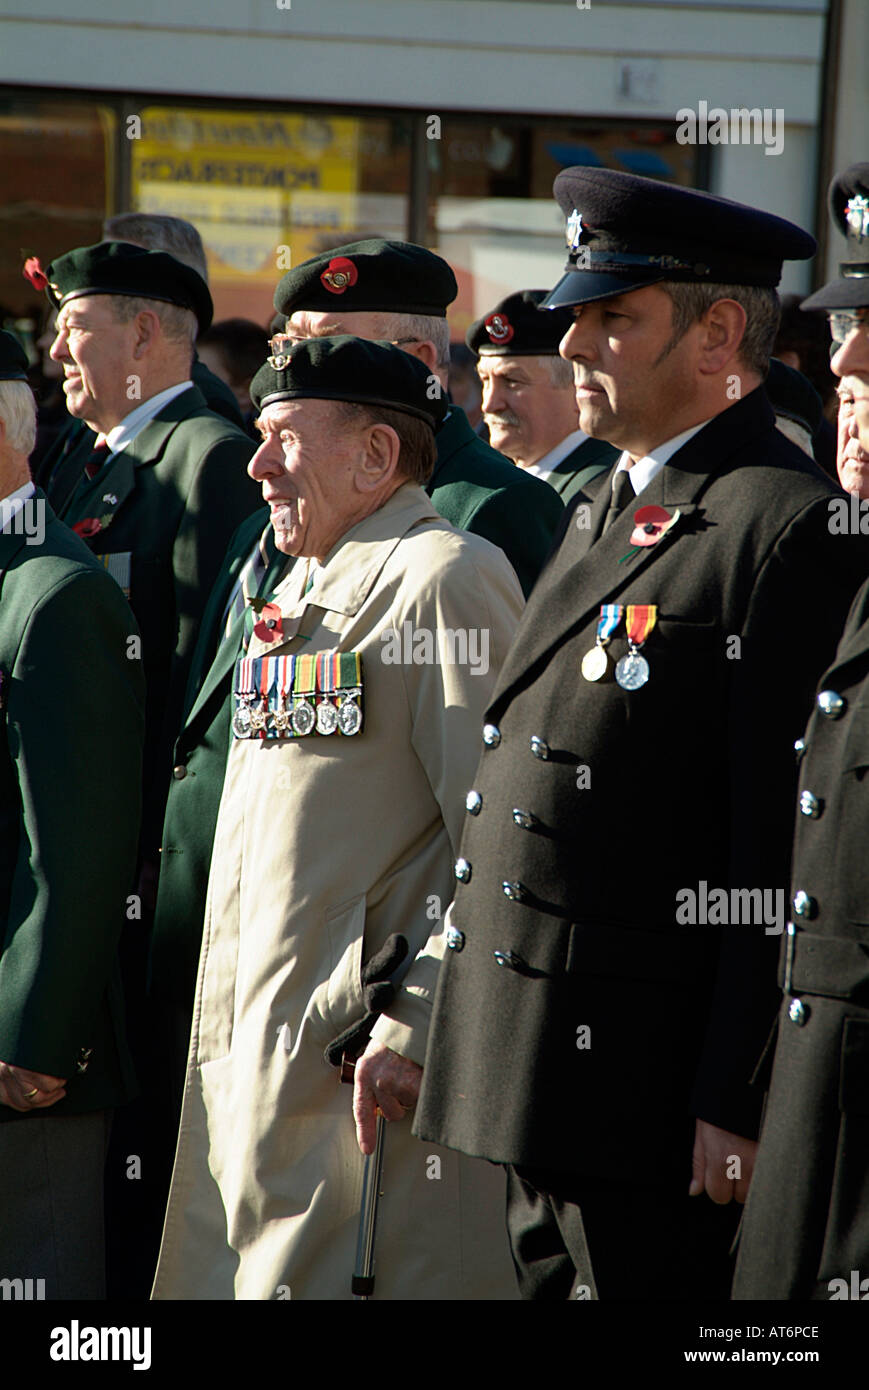 march marching soldiers on parade on remeberance sunday old tradition poppy british legion respect army navy royal airforce old Stock Photo